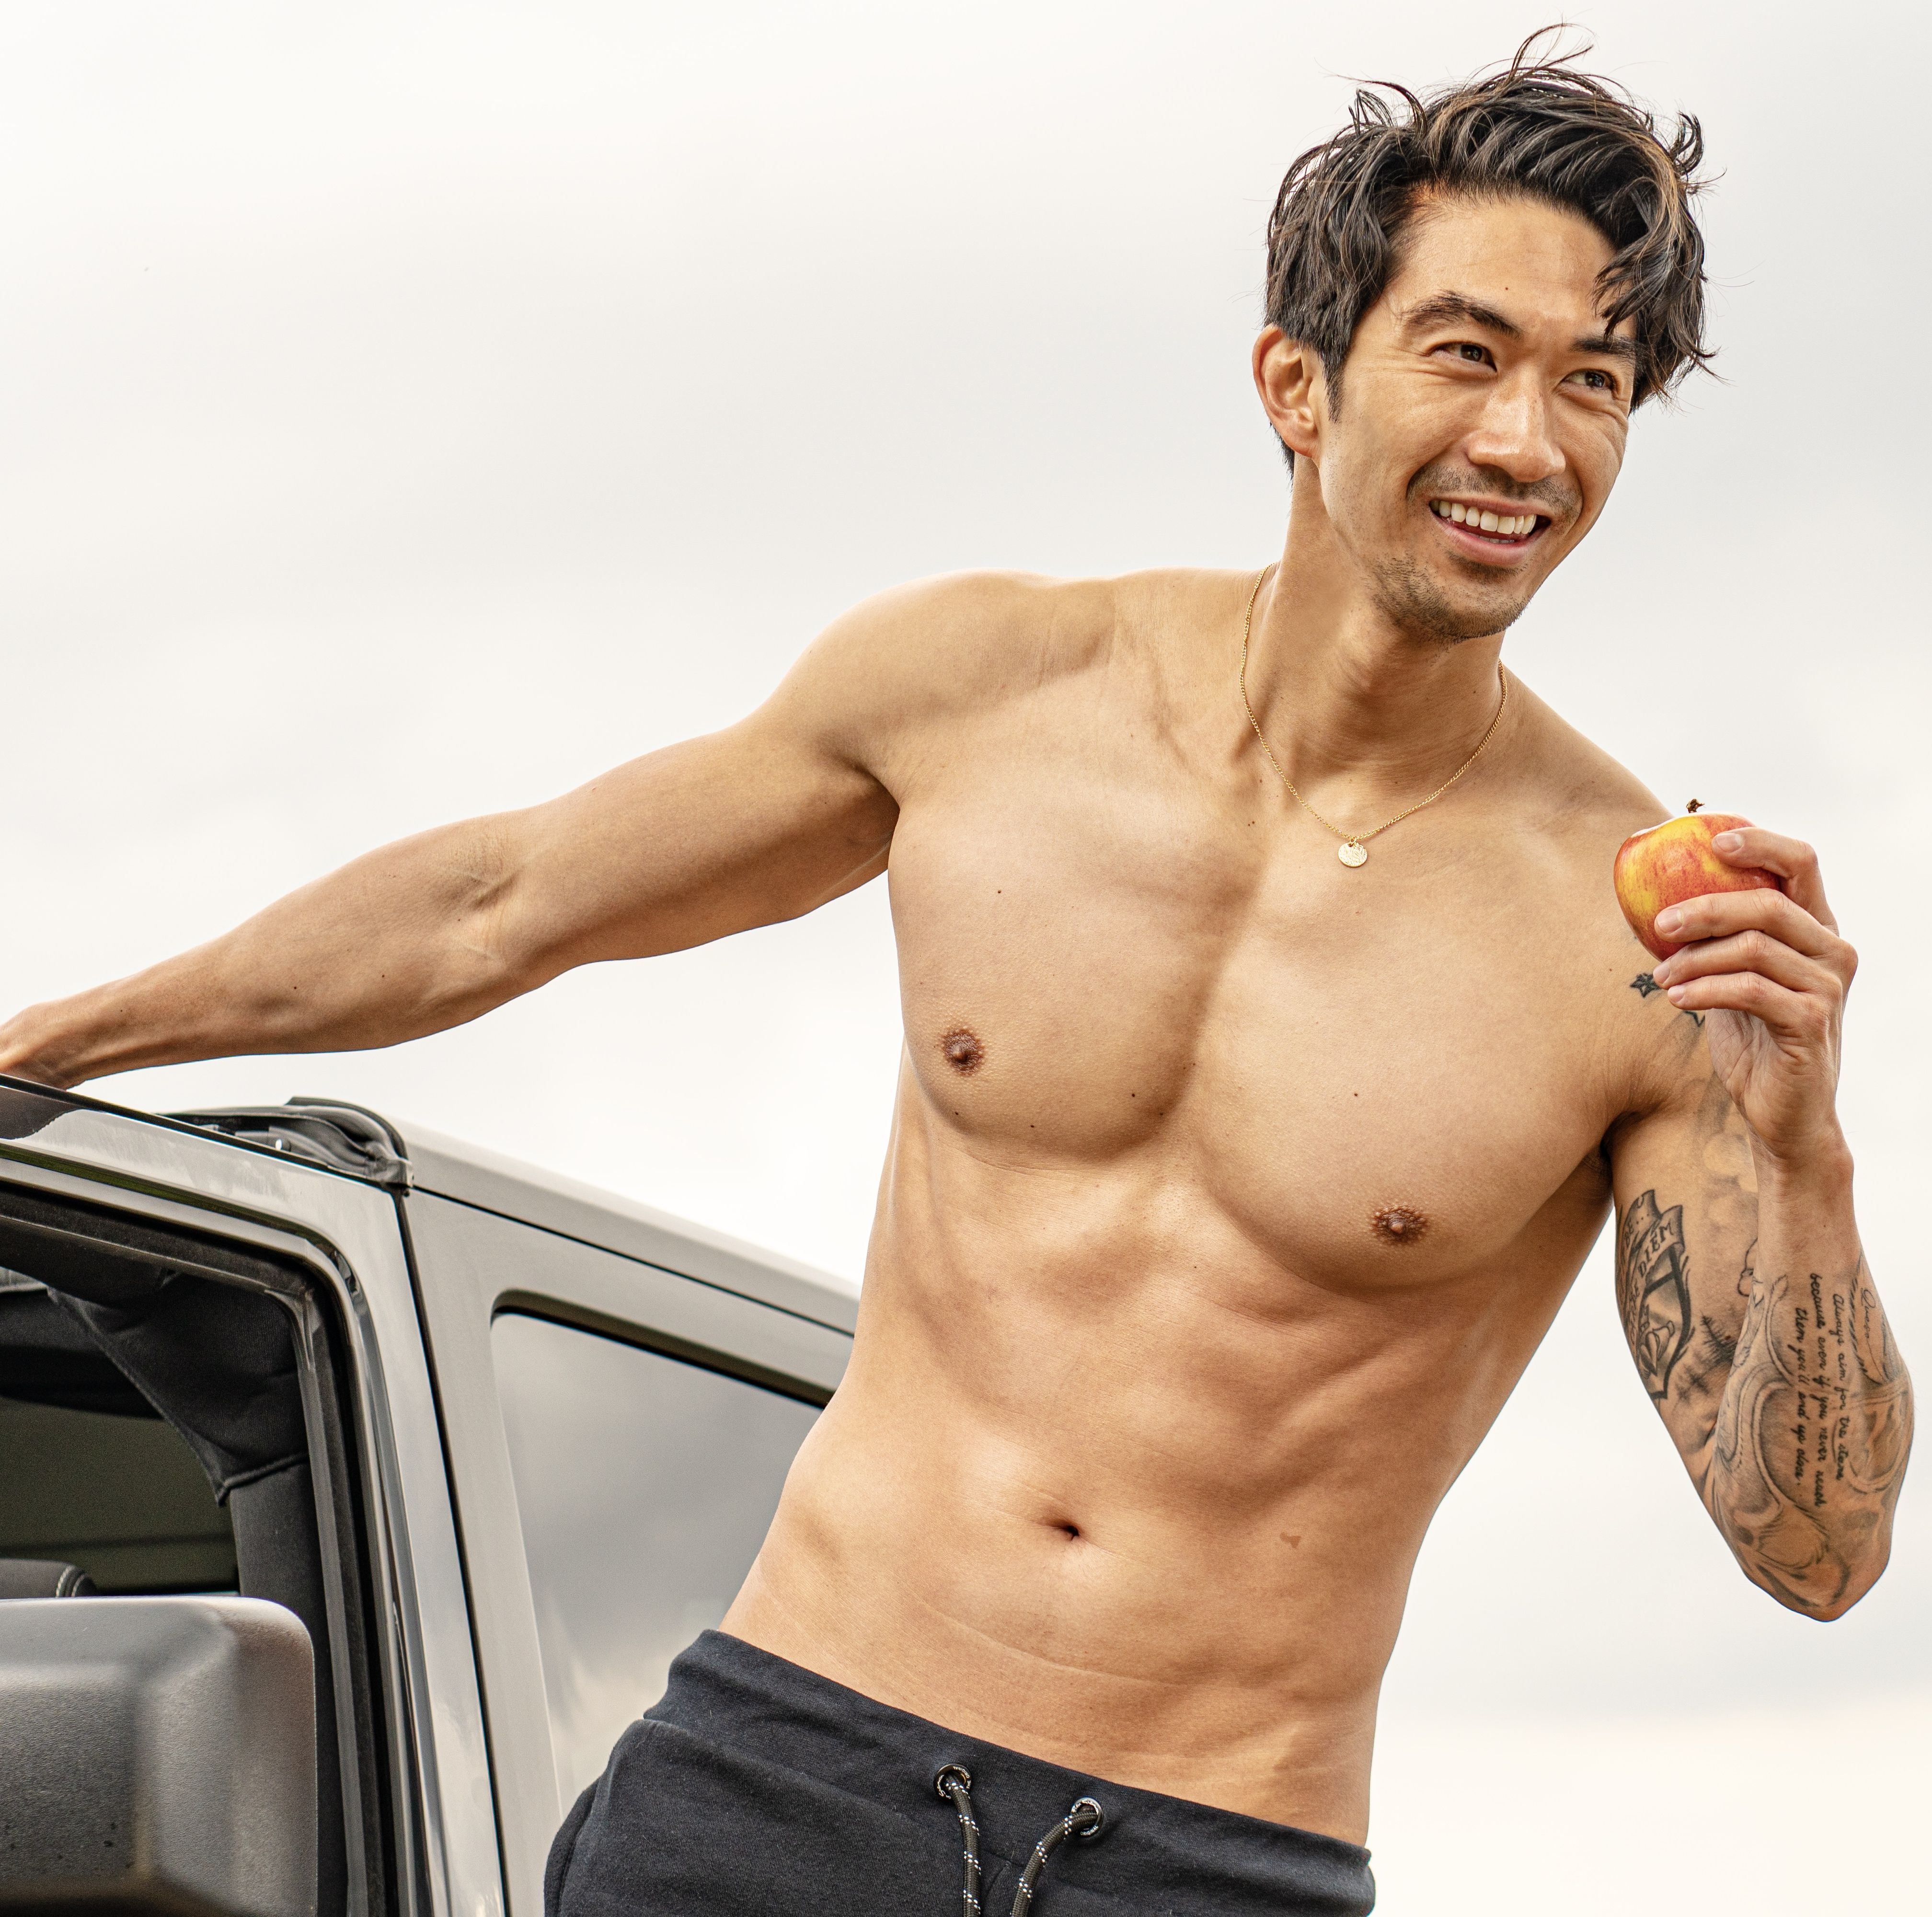 How Celebrity Chef Ronnie Woo Lives Deliciously While Staying Shredded